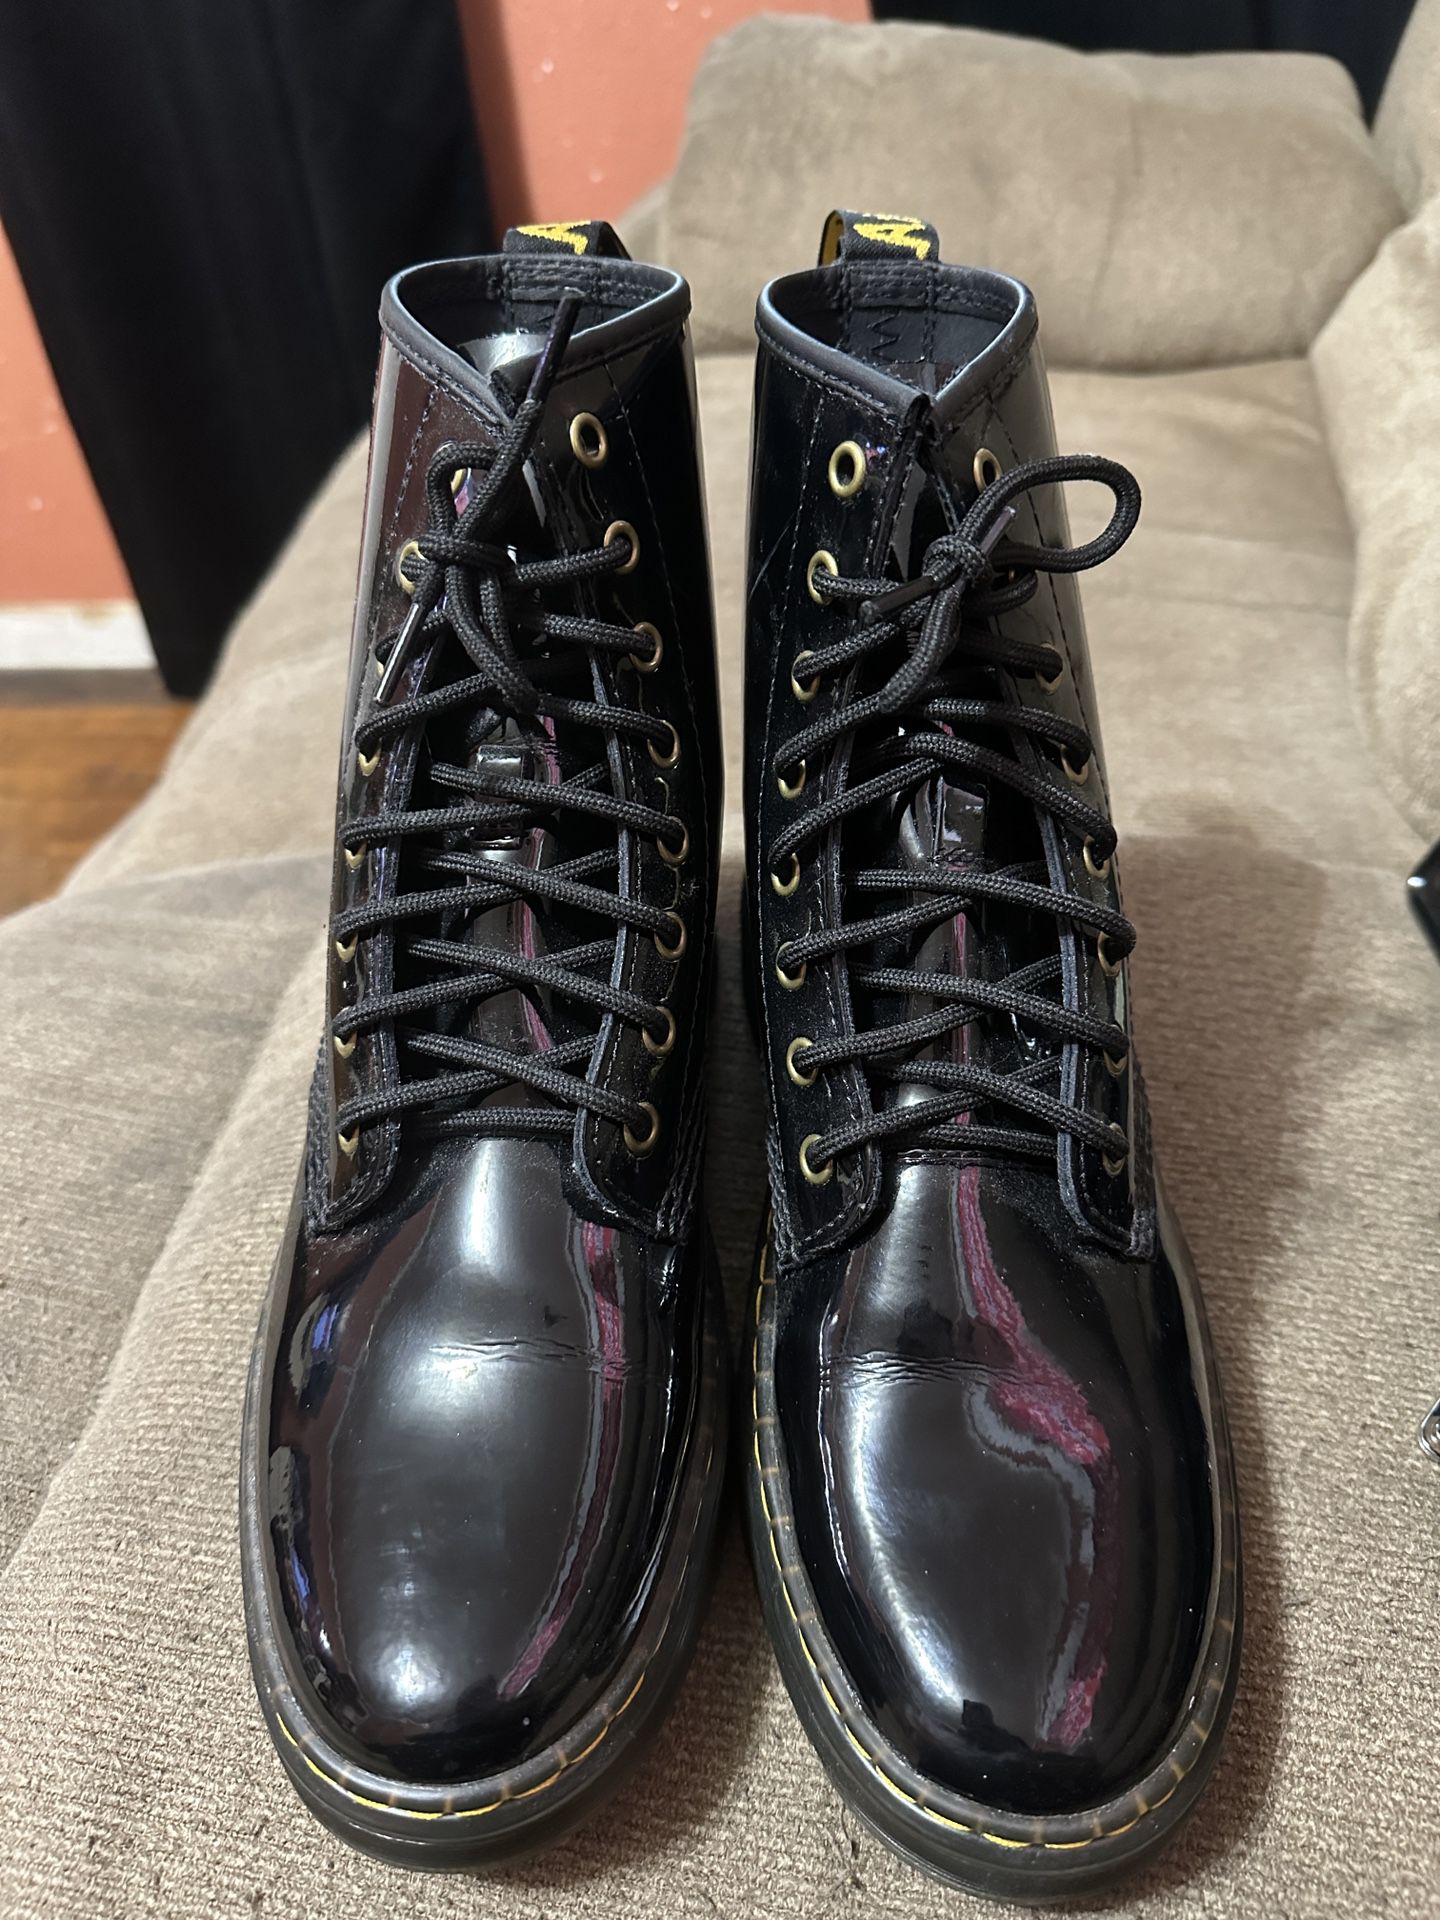 Dr. Martens 1460 8 Eye Patent Boots.